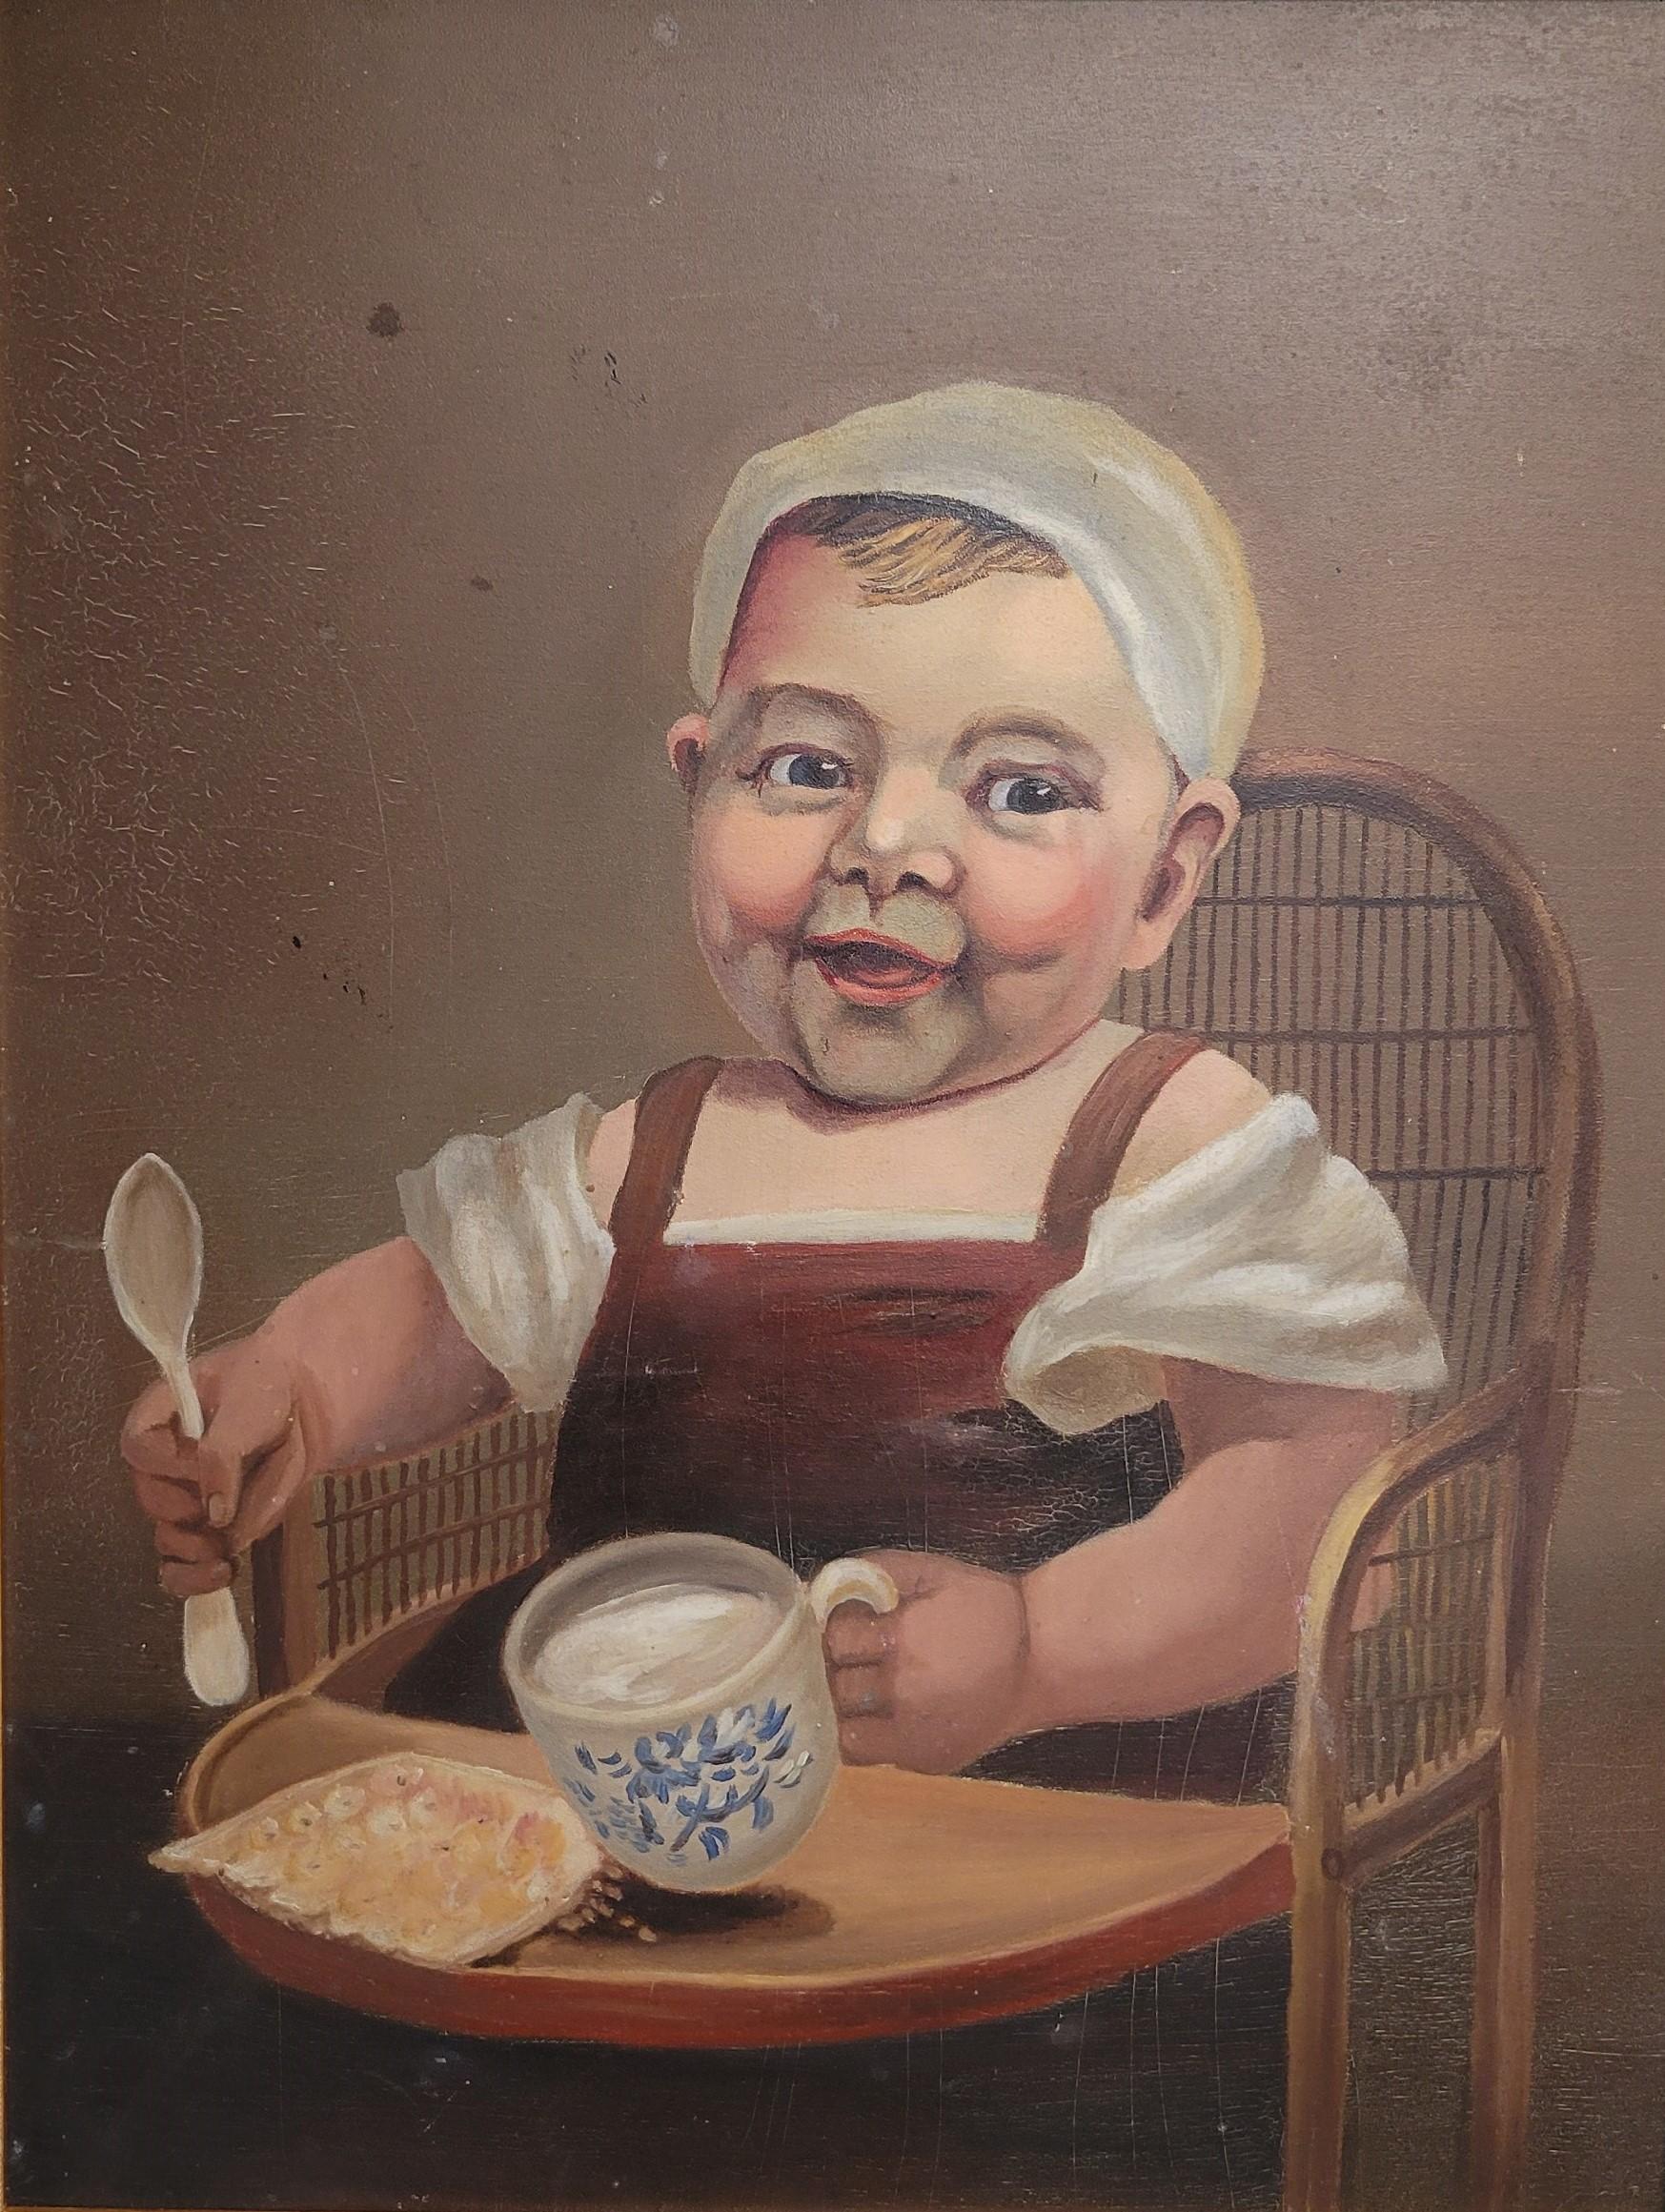 A charming vintage oil on fiber board painting of a young child with a blue and white cup and a piece of bread (?). Painted in shades of warm brown, pinks, maroons and whites. Surface abrasions and scratches are evident from rough handling. The